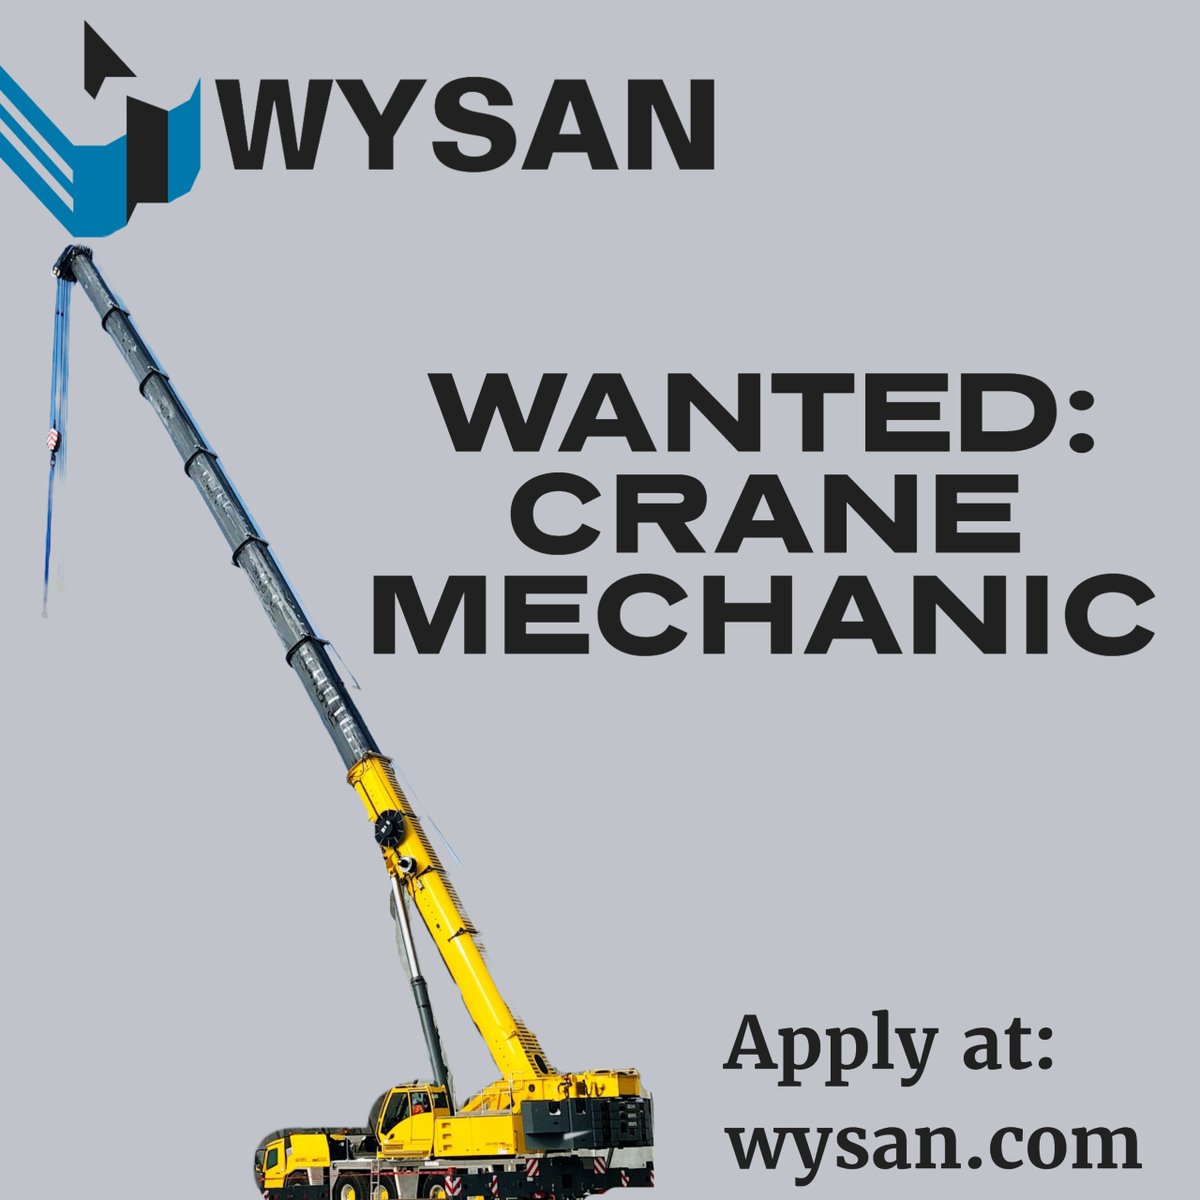 🚧 Join Our Team as a Crane Mechanic! 🛠️
Are you a skilled crane mechanic looking for an exciting opportunity? Join the Wysan team and earn great pay and benefits!
Learn more and apply at wysan.com

#NowHiring #CraneMechanic #MechanicJobs #CraneServices  #Job